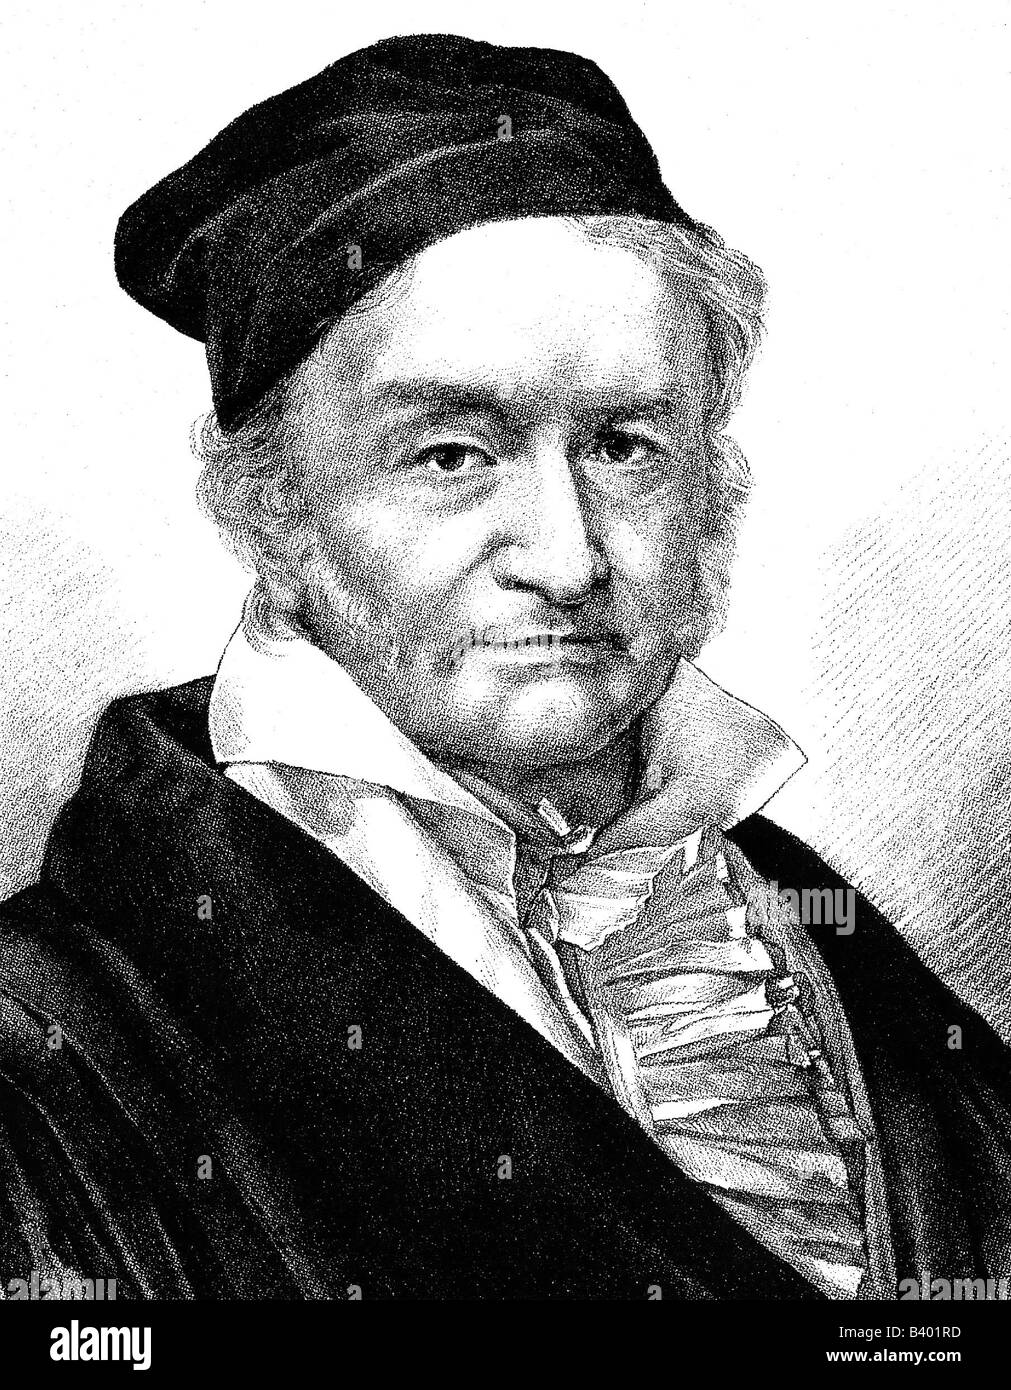 Gauss, Carl Friedrich, 30.4.1777 - 23.2.1855, German mathematician, scientist, portrait, engraving, 19th century, science, , Artist's Copyright has not to be cleared Stock Photo